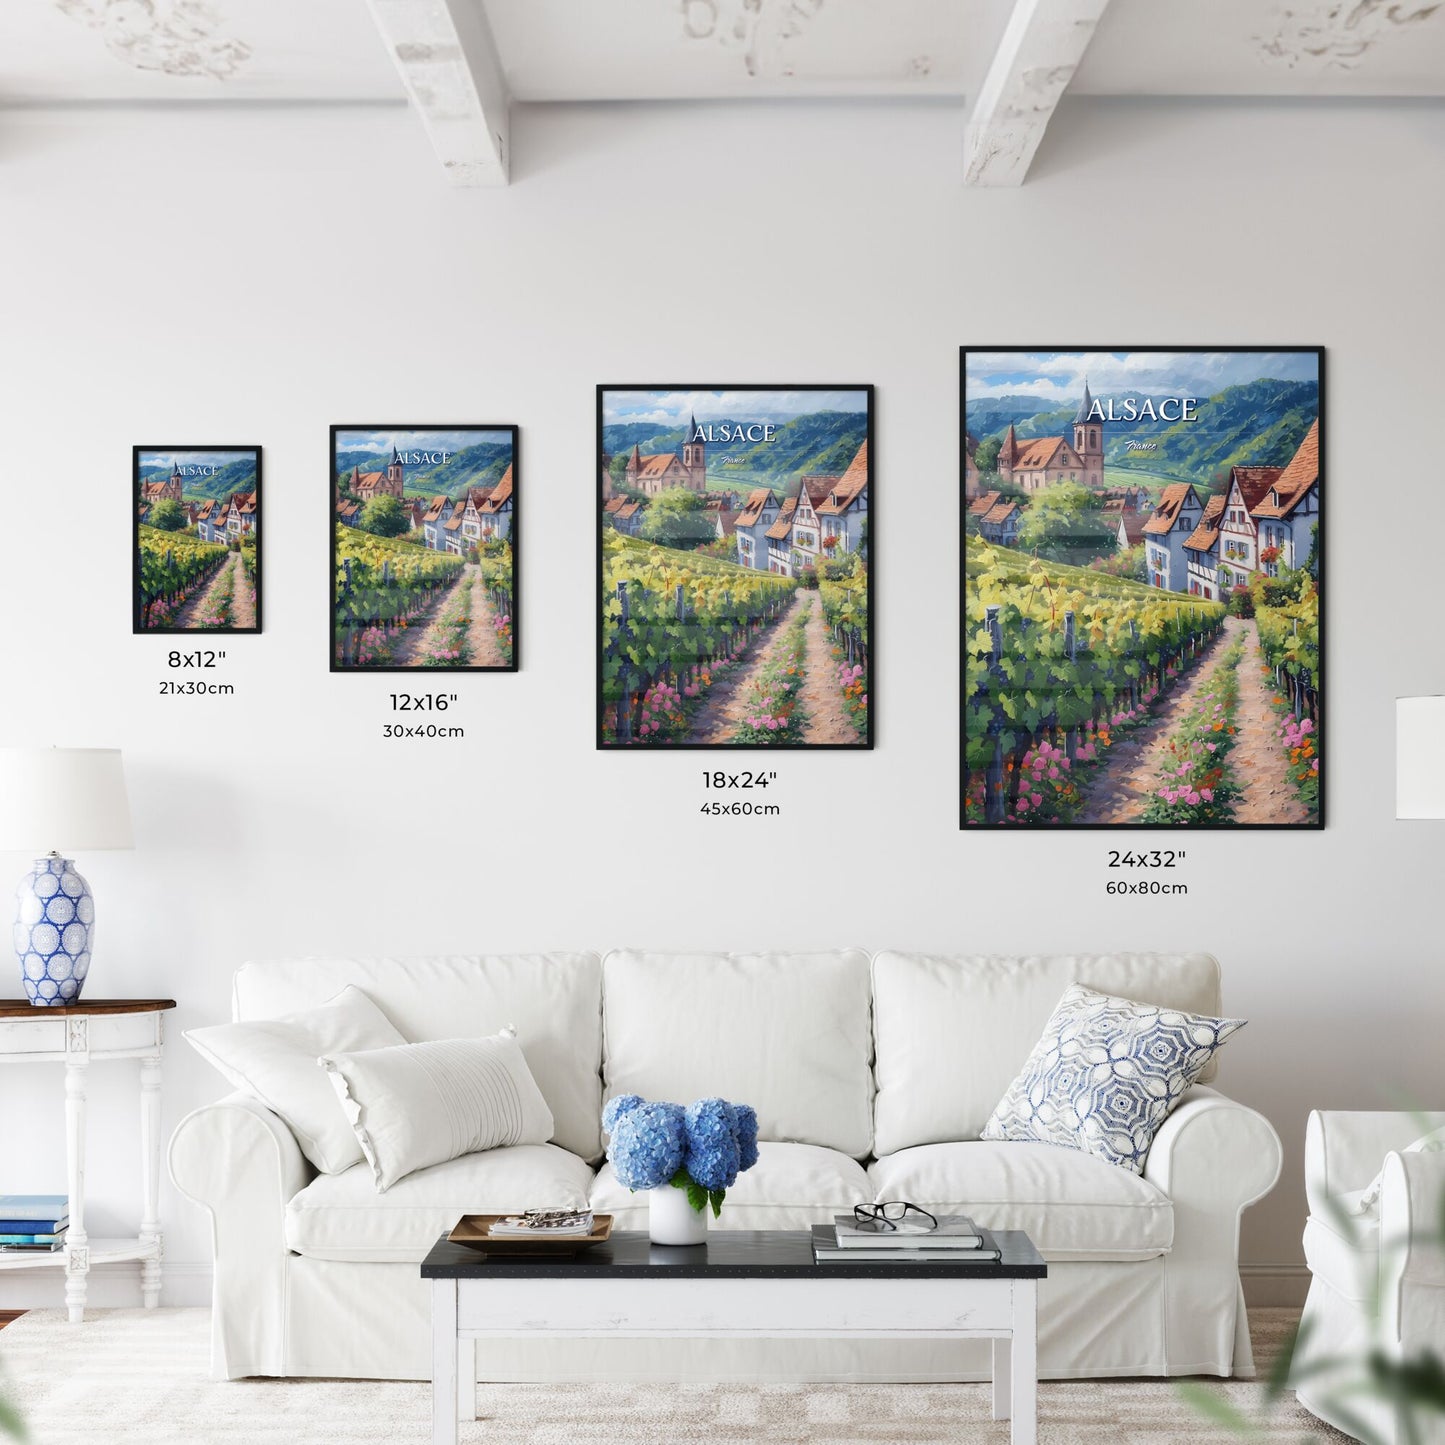 Alsace, France - Art print of a painting of a vineyard with buildings and mountains in the background Default Title